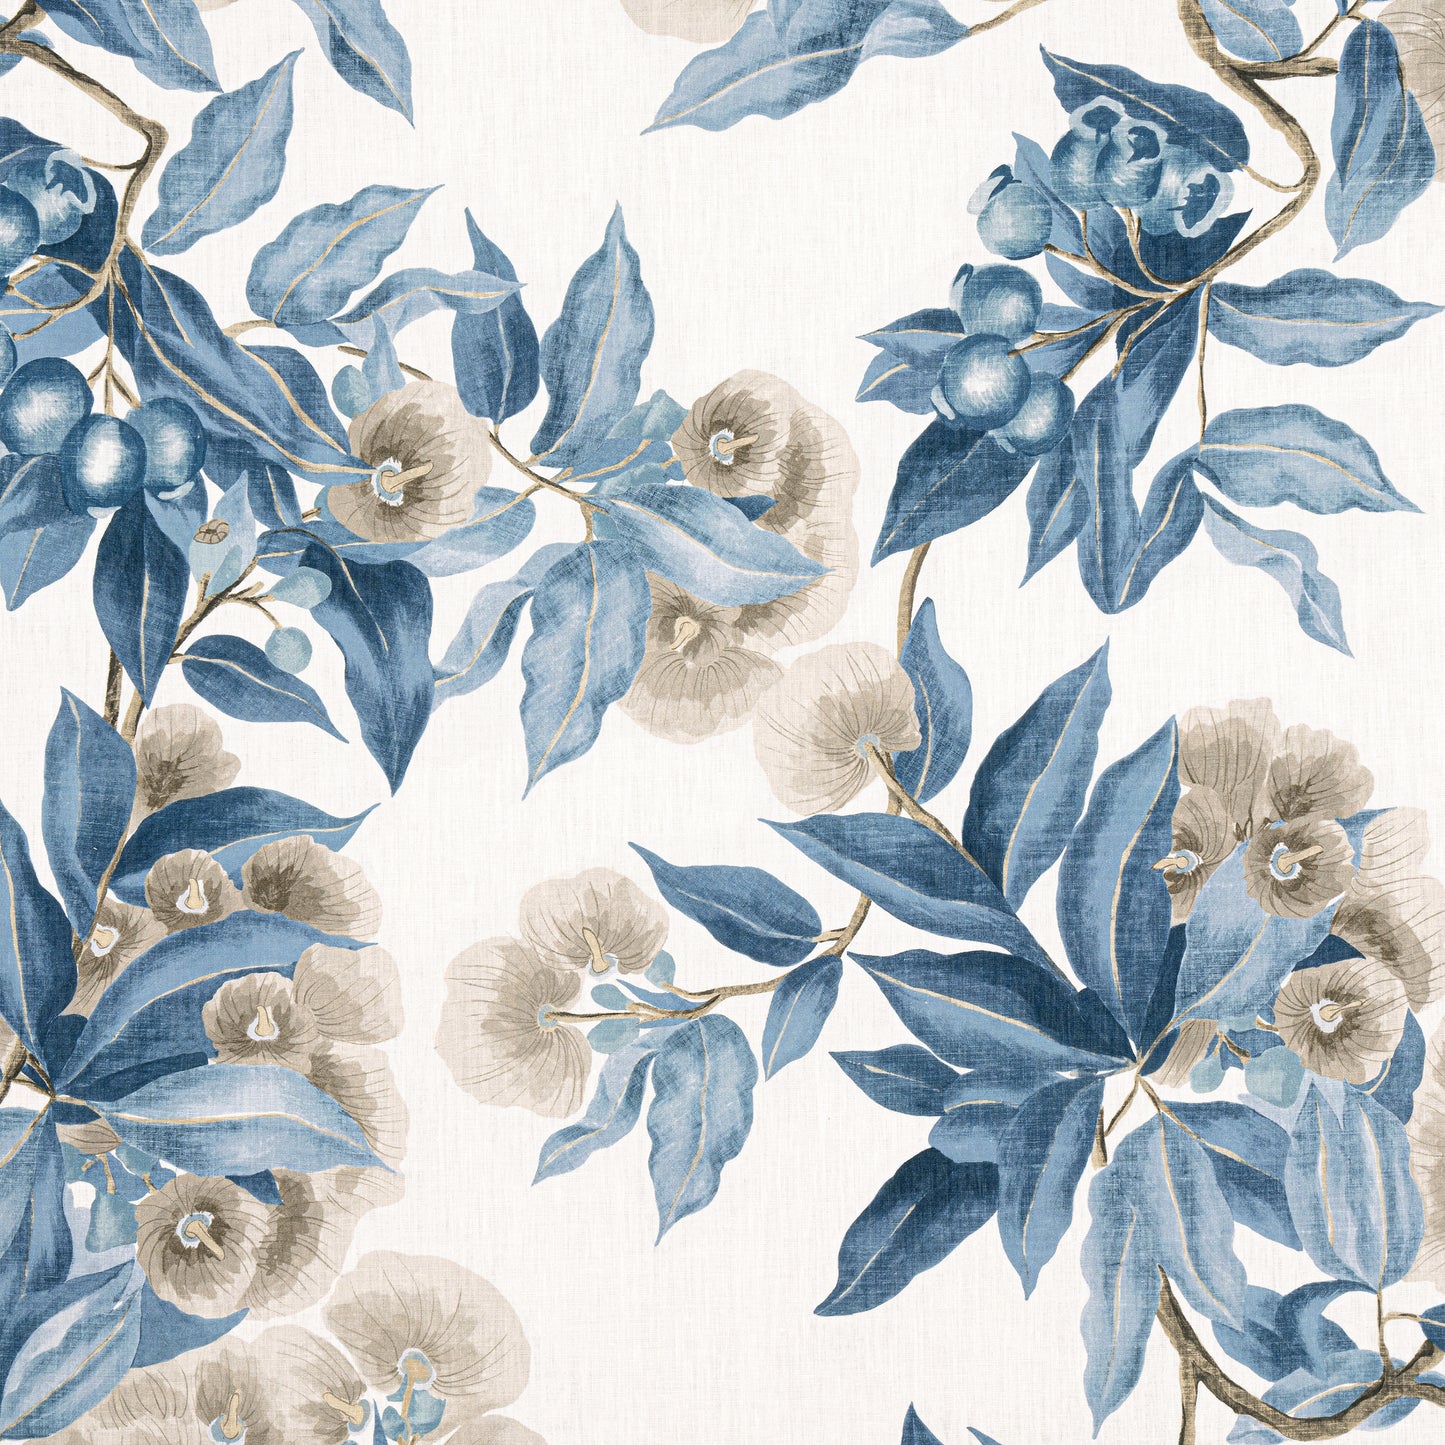 Purchase  Ann French Fabric Pattern number AF24553  pattern name  Camellia Garden